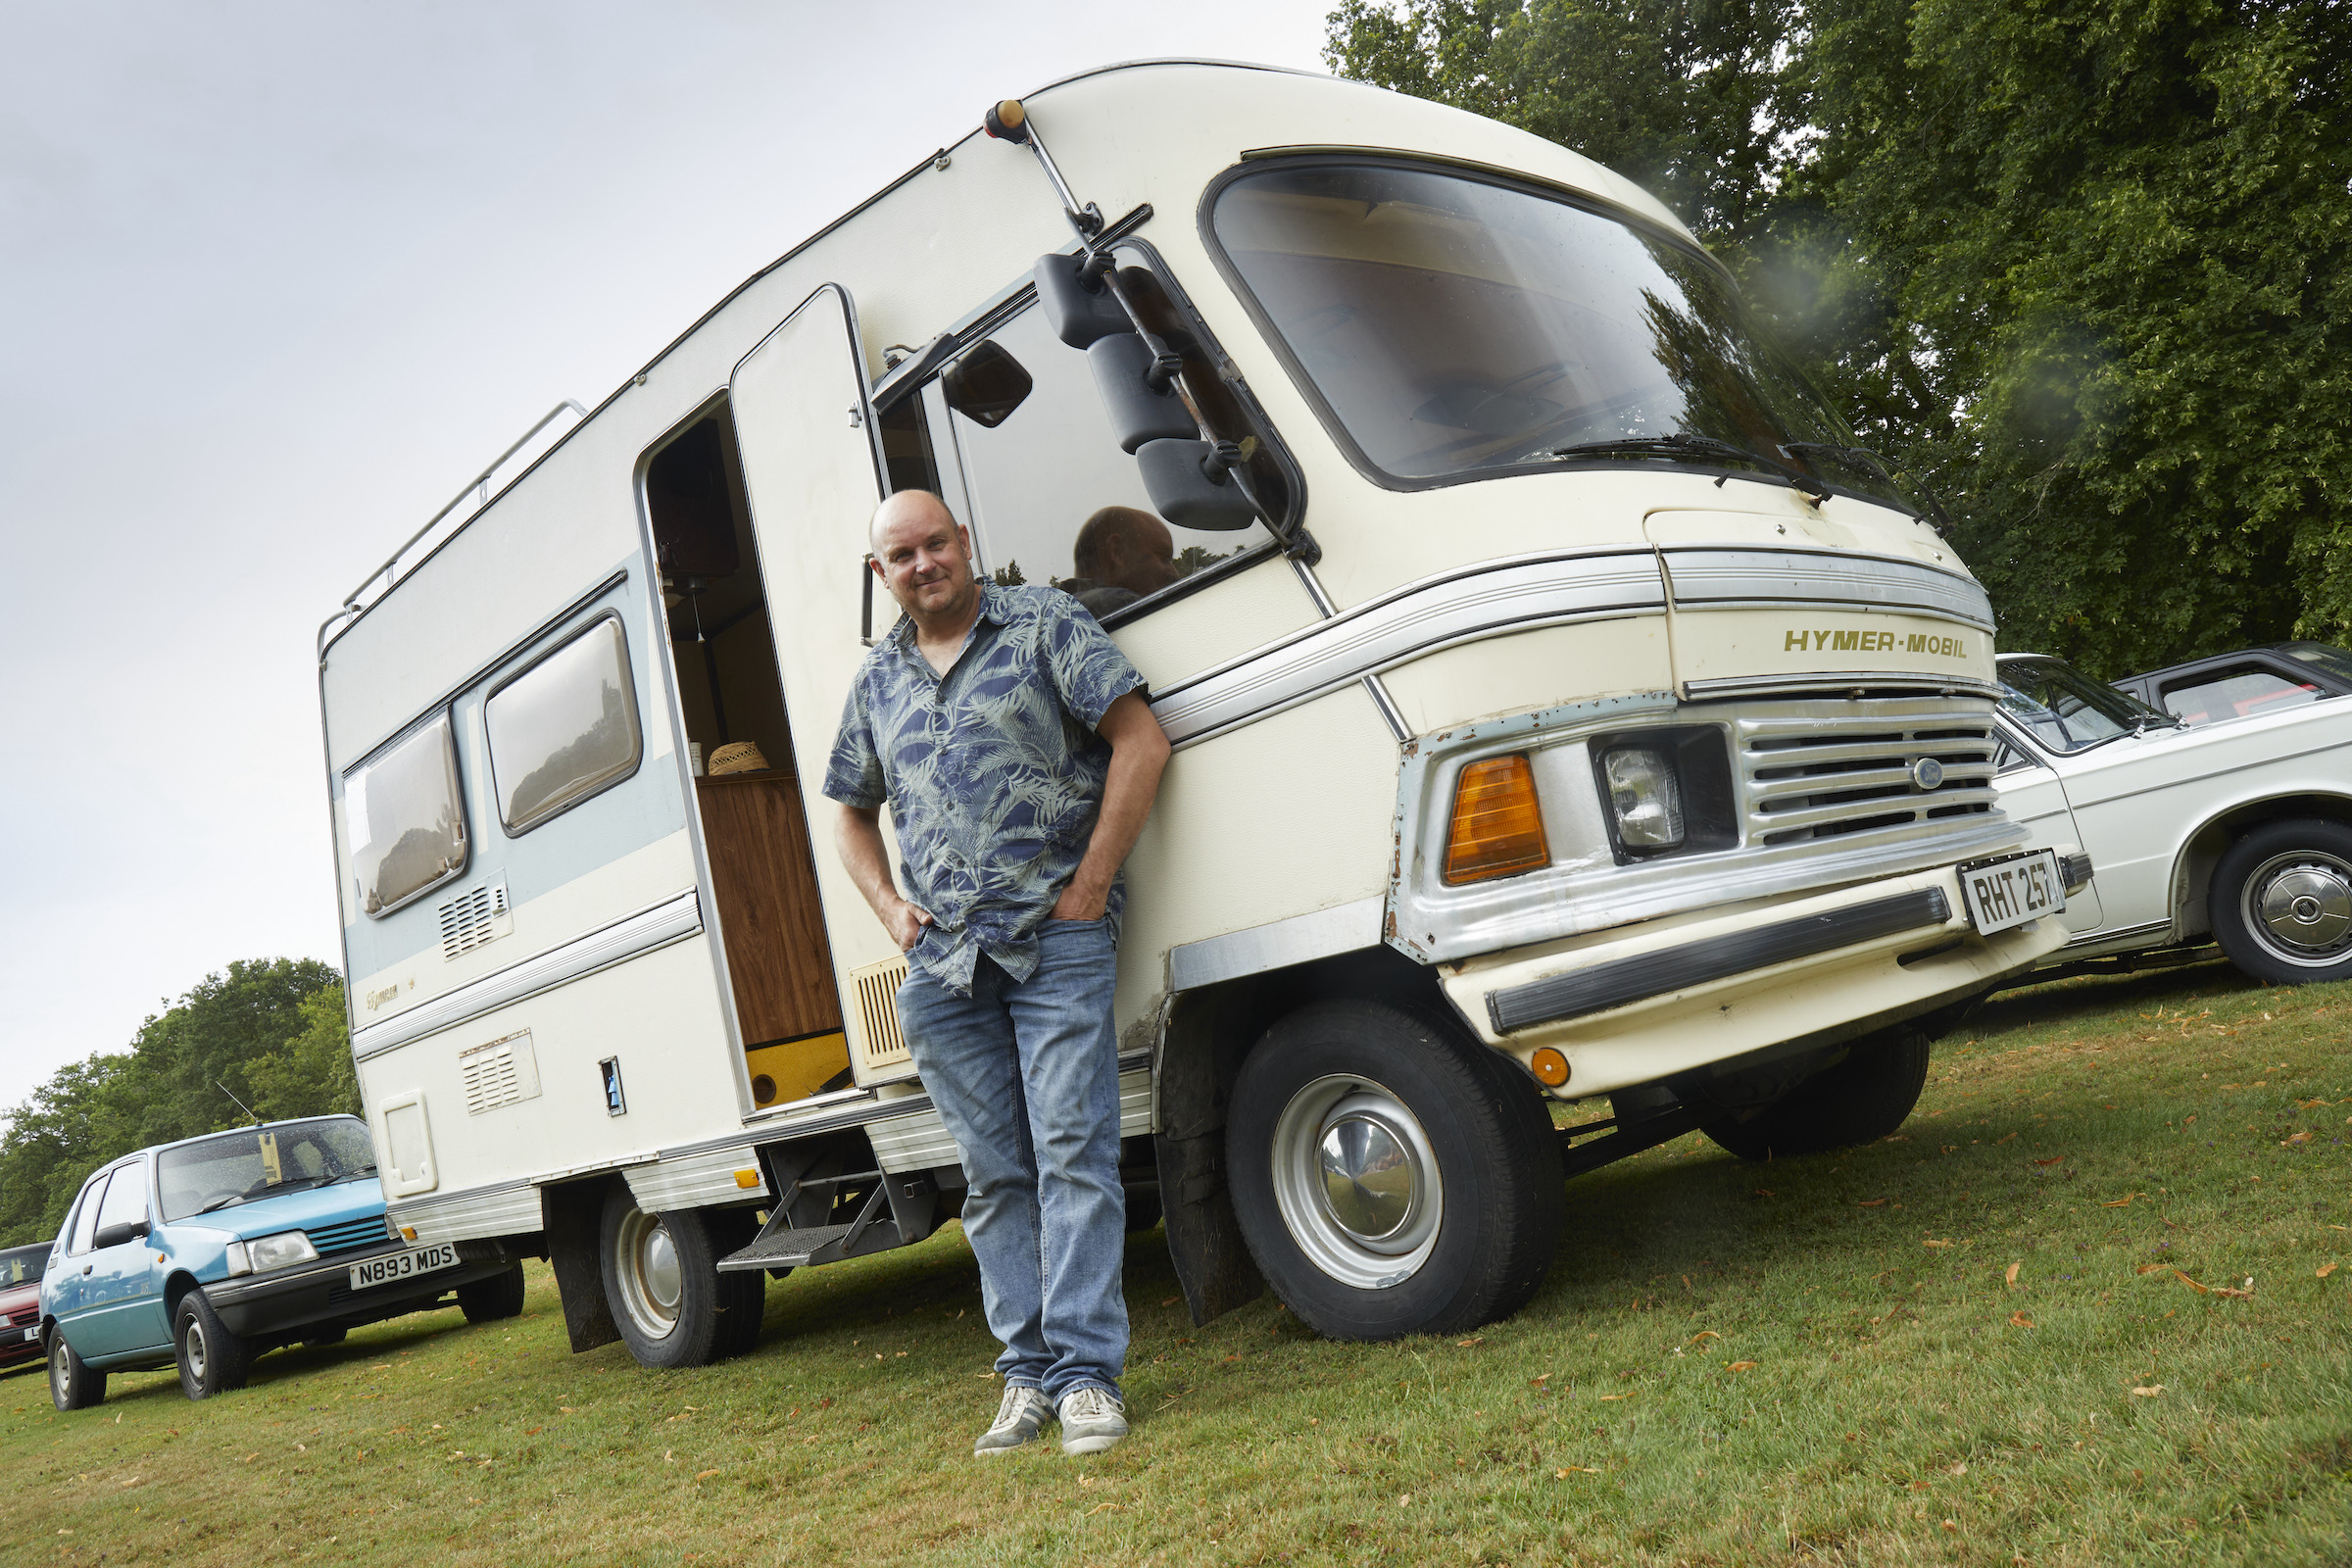 Your Classics: The Hymermobil camper that towered over Festival of the Unexceptional